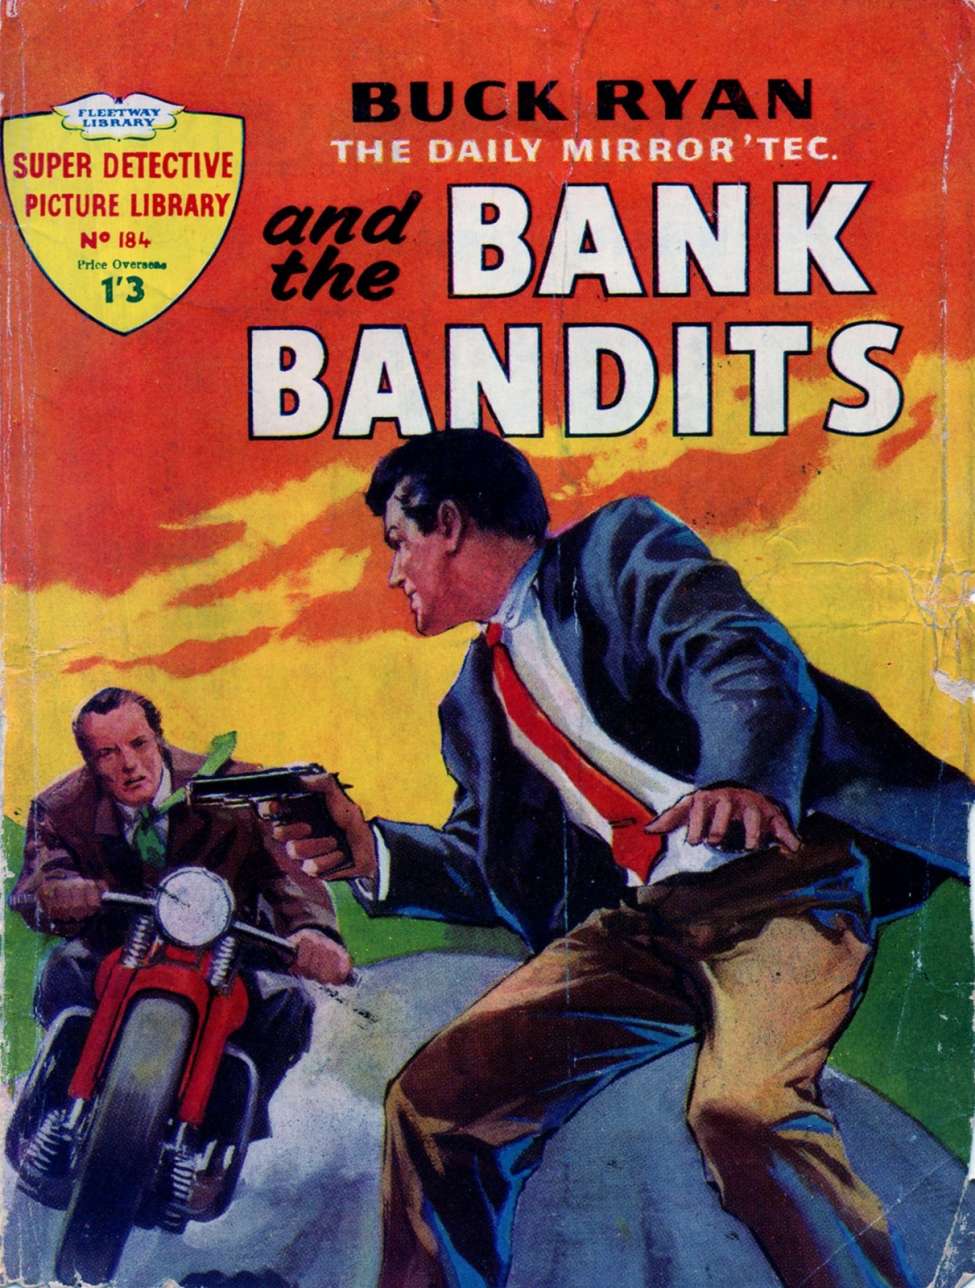 Comic Book Cover For Super Detective Library 184 - Buck Ryan And The Bank Bandits